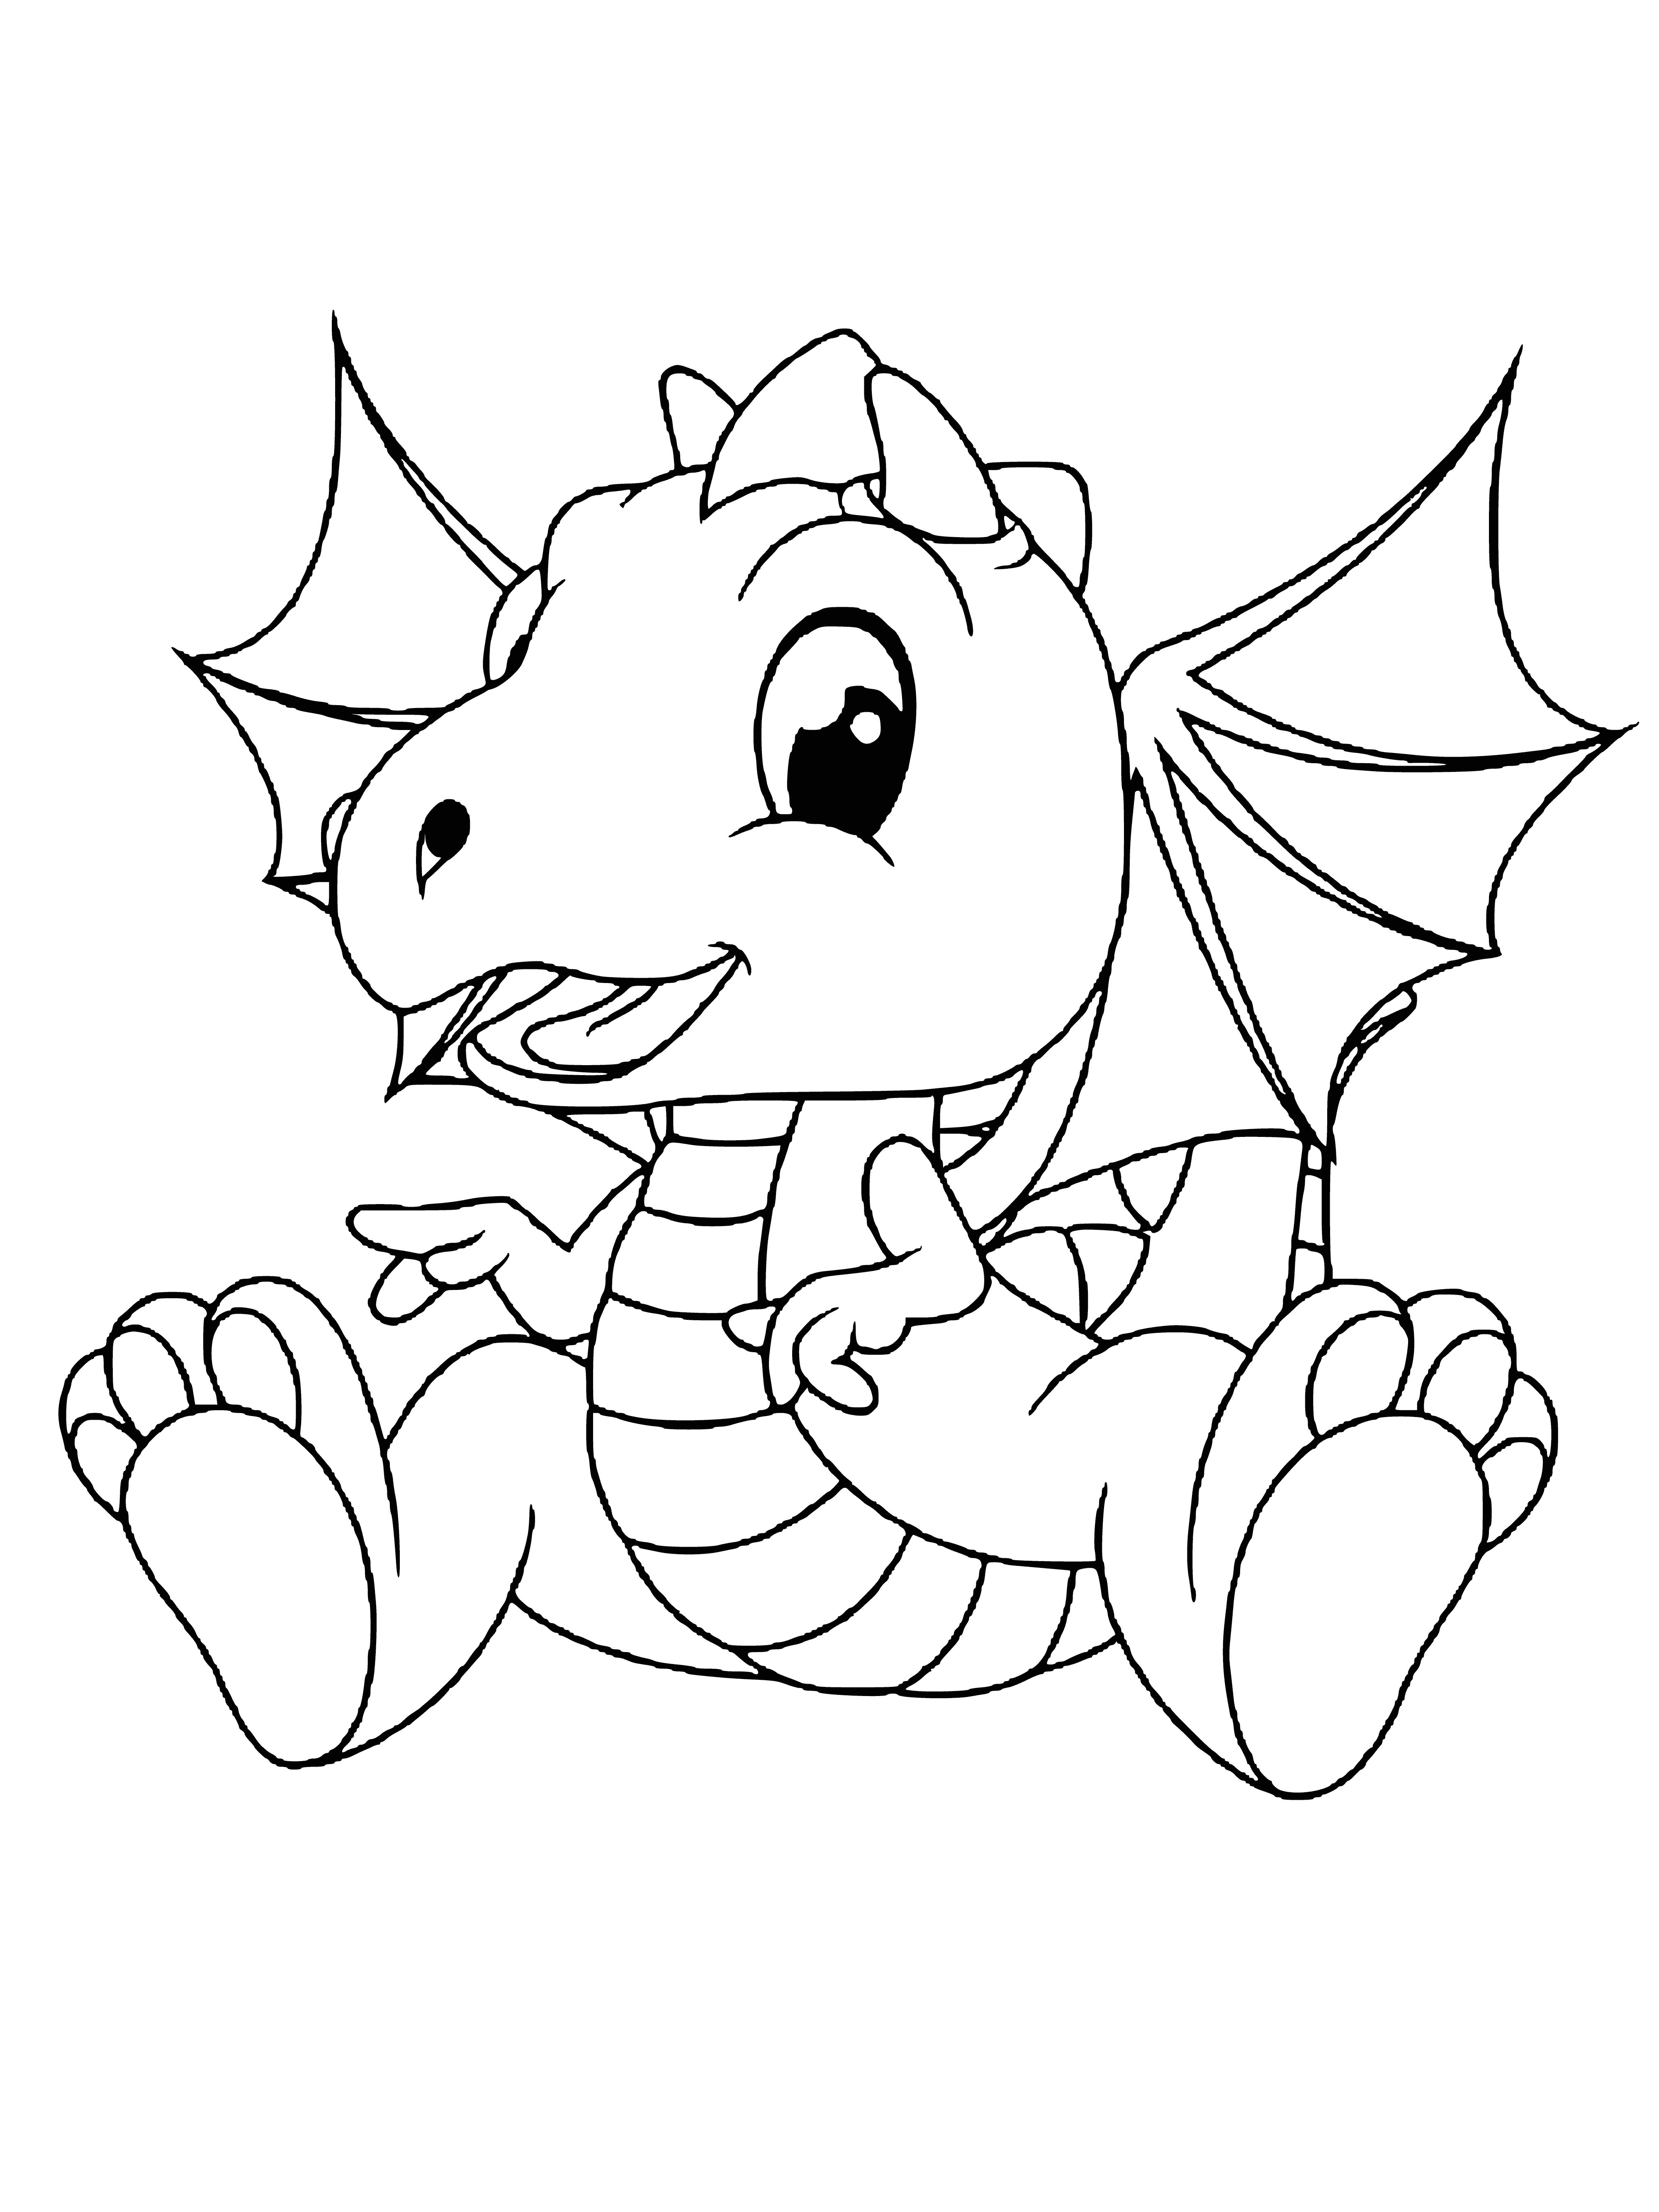 coloring page: Two dragons-green & purple-flying next to each other in the sky. Small w/ wings. #coloringPage